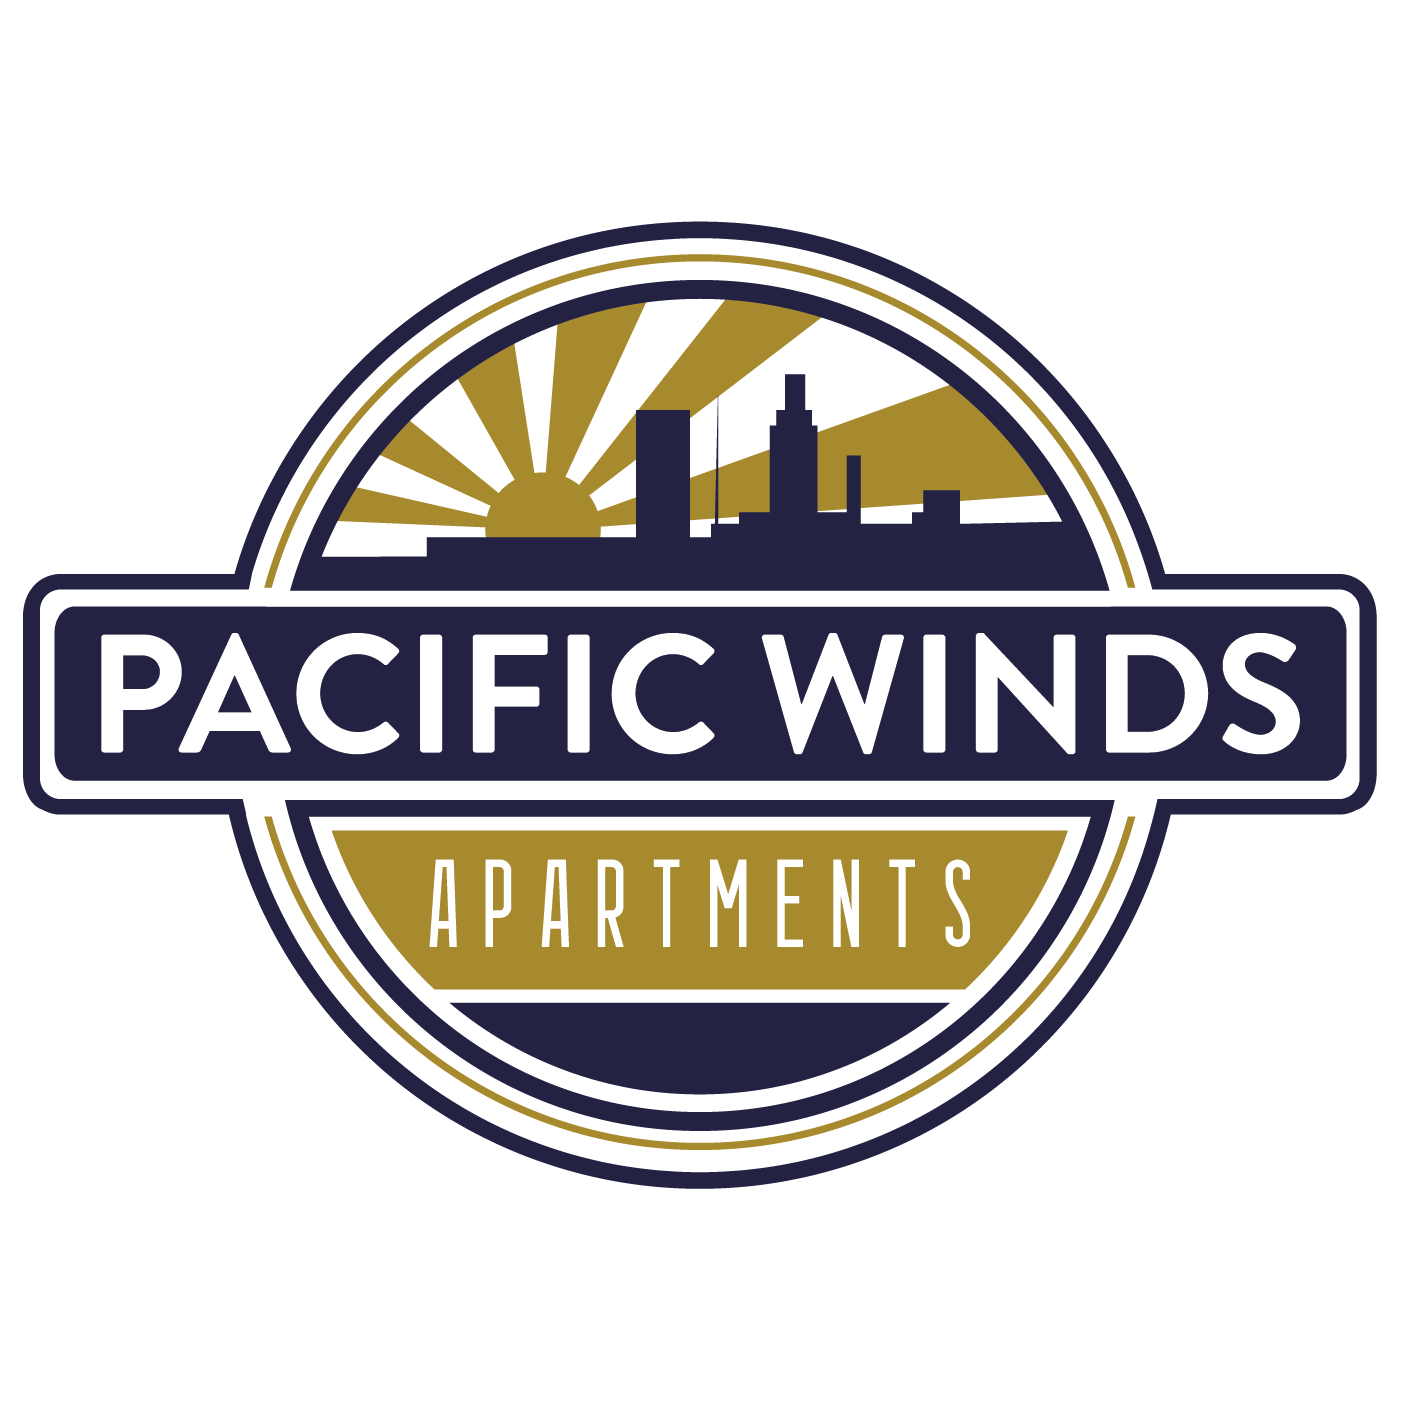 Pacific Winds Apartments